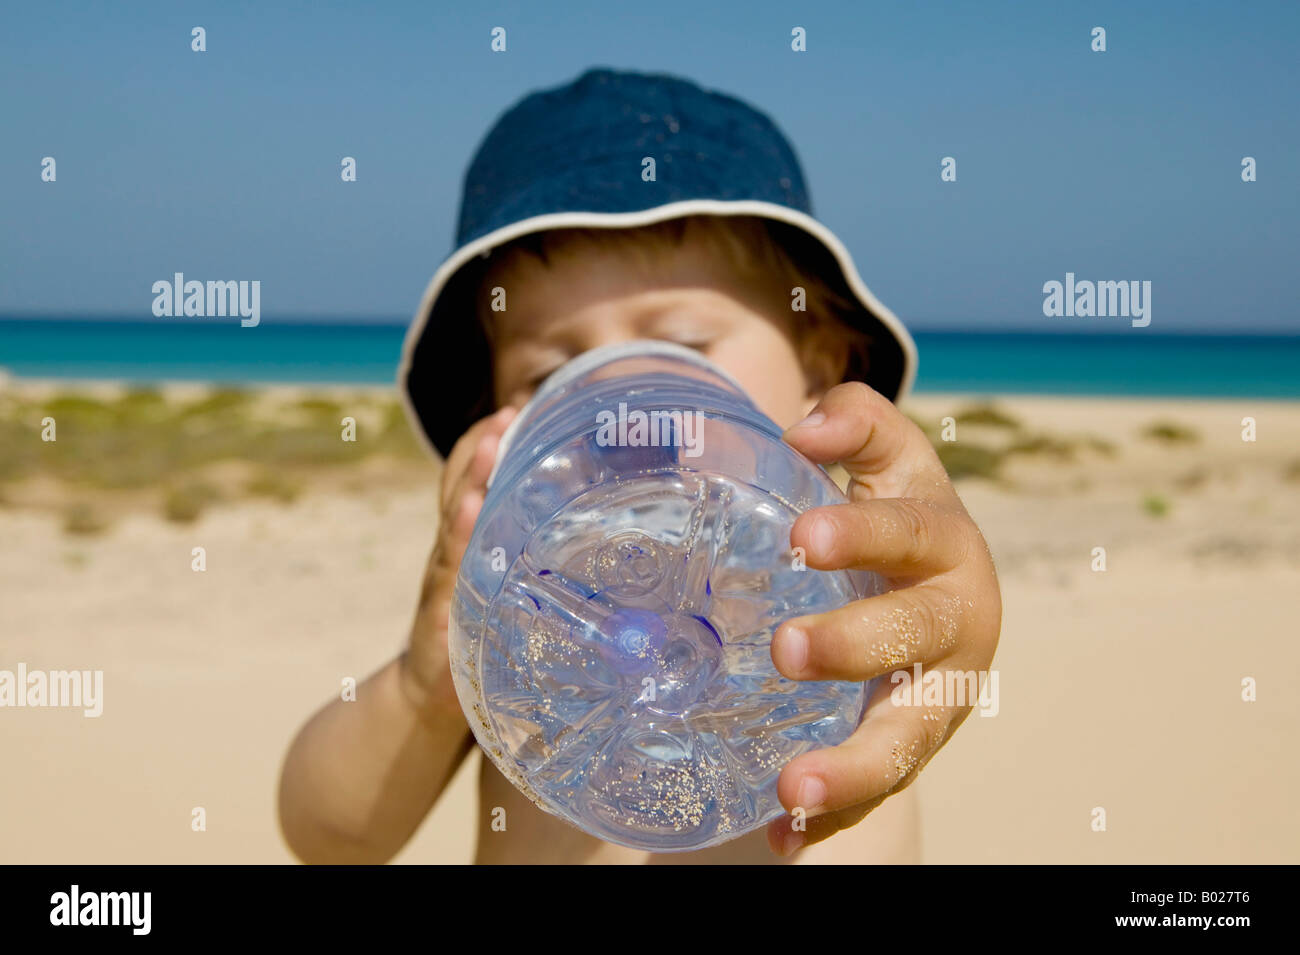 toddler drinking water from plastic bottle Stock Photo